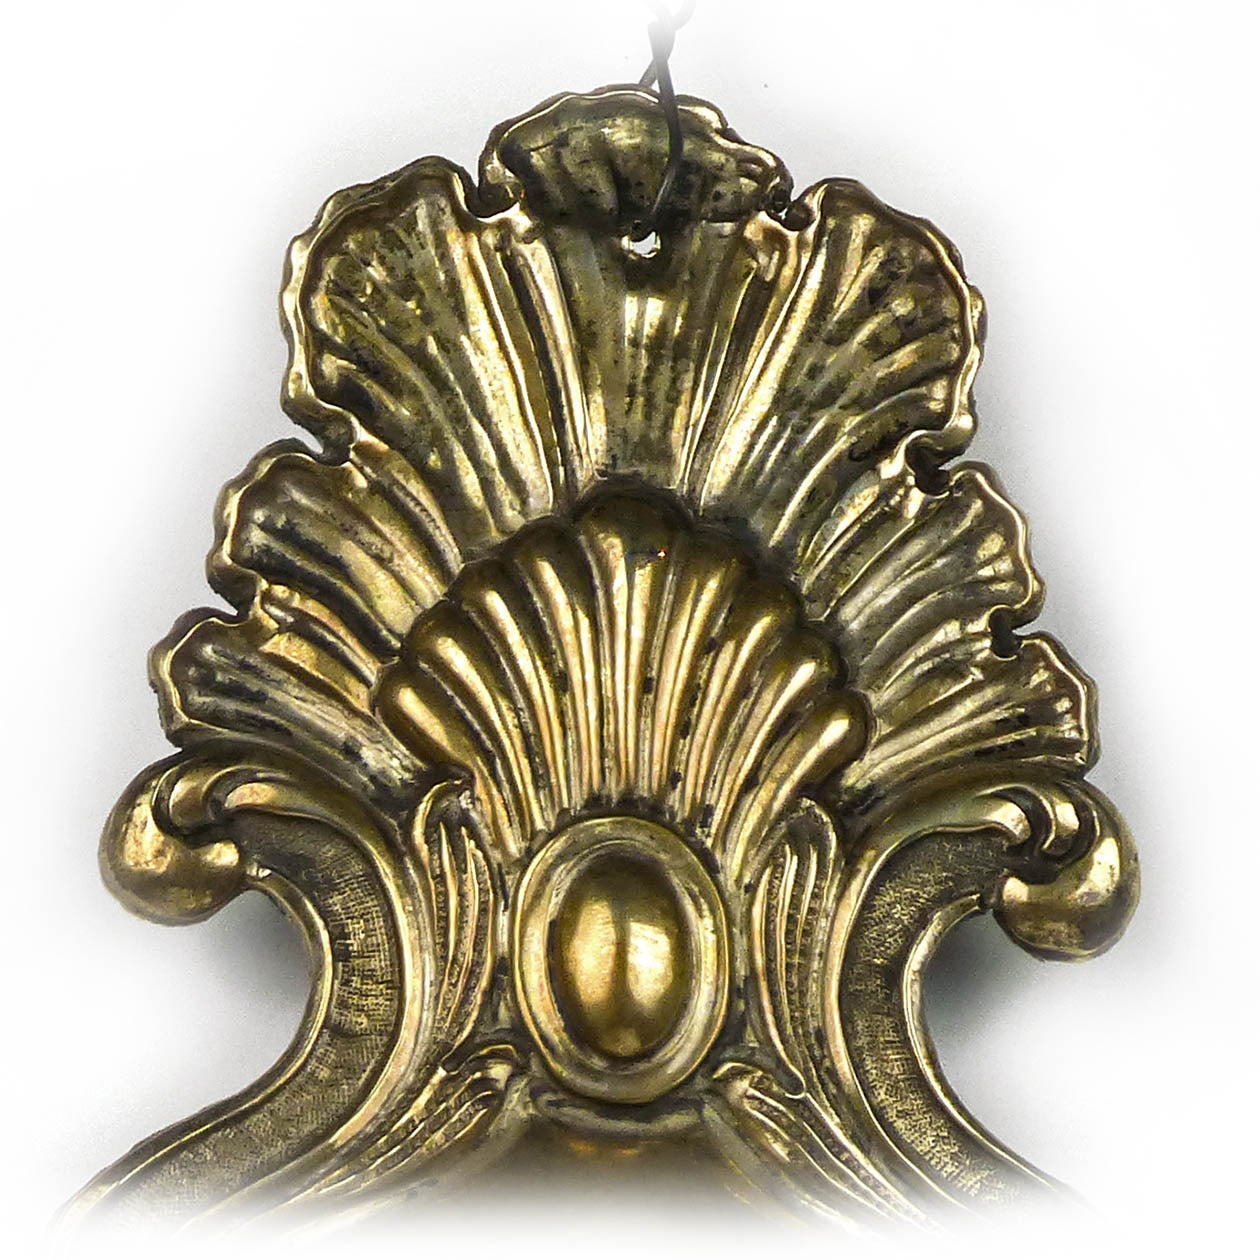 Continental silver sconce, 18th century.

No mark, with brass arm.